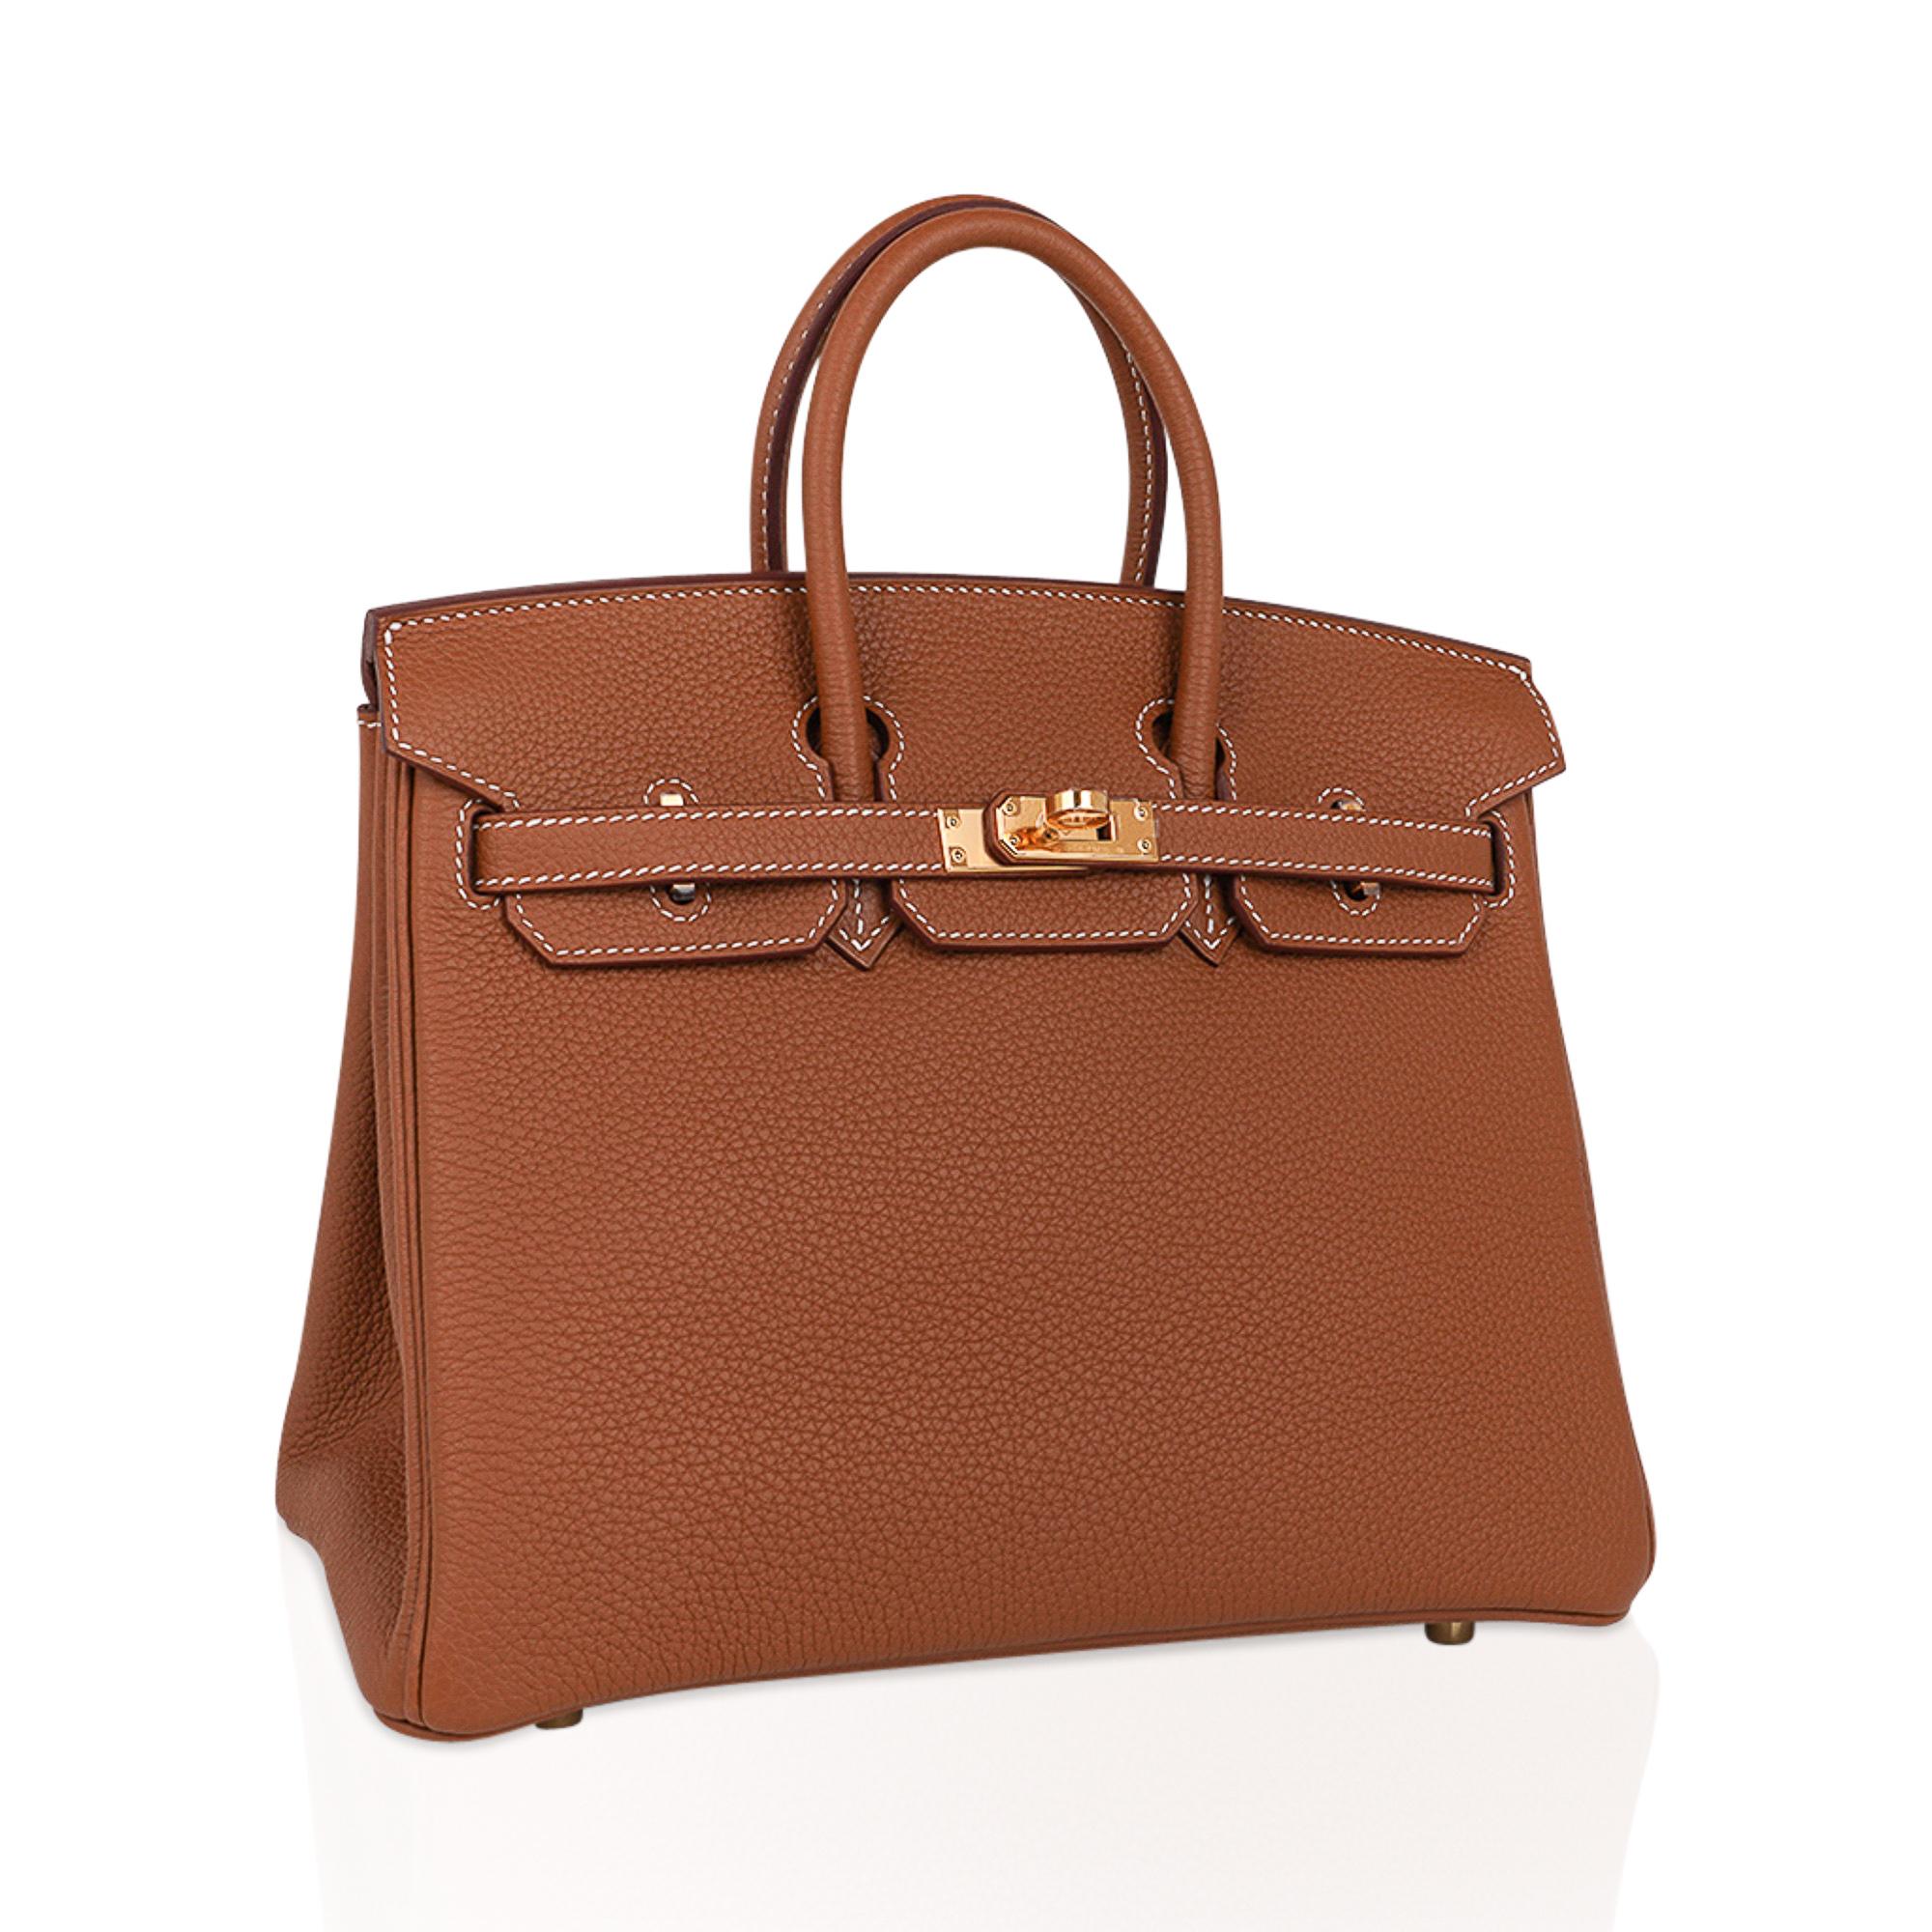 Mightychic offers an Hermes Birkin 25 bag featured in classic Gold.
This neutral Hermes Birkin is the all time perfect neutral statement.
Signature bone top stitch detail.
Lush Togo leather is supple and scratch resistant.
Rich with gold